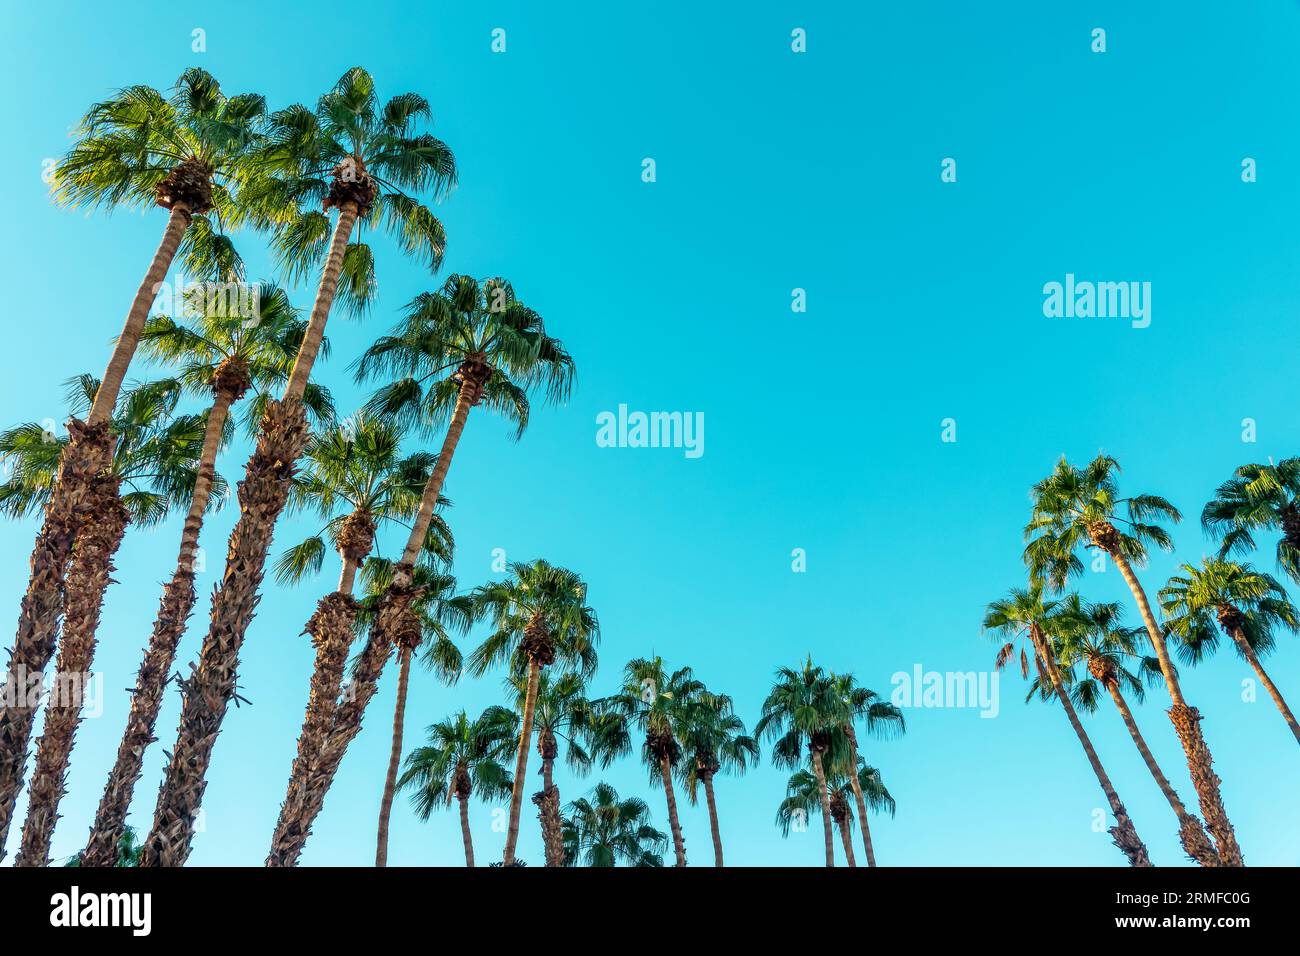 Palm trees and blue sky with copy space, tropical background Stock Photo